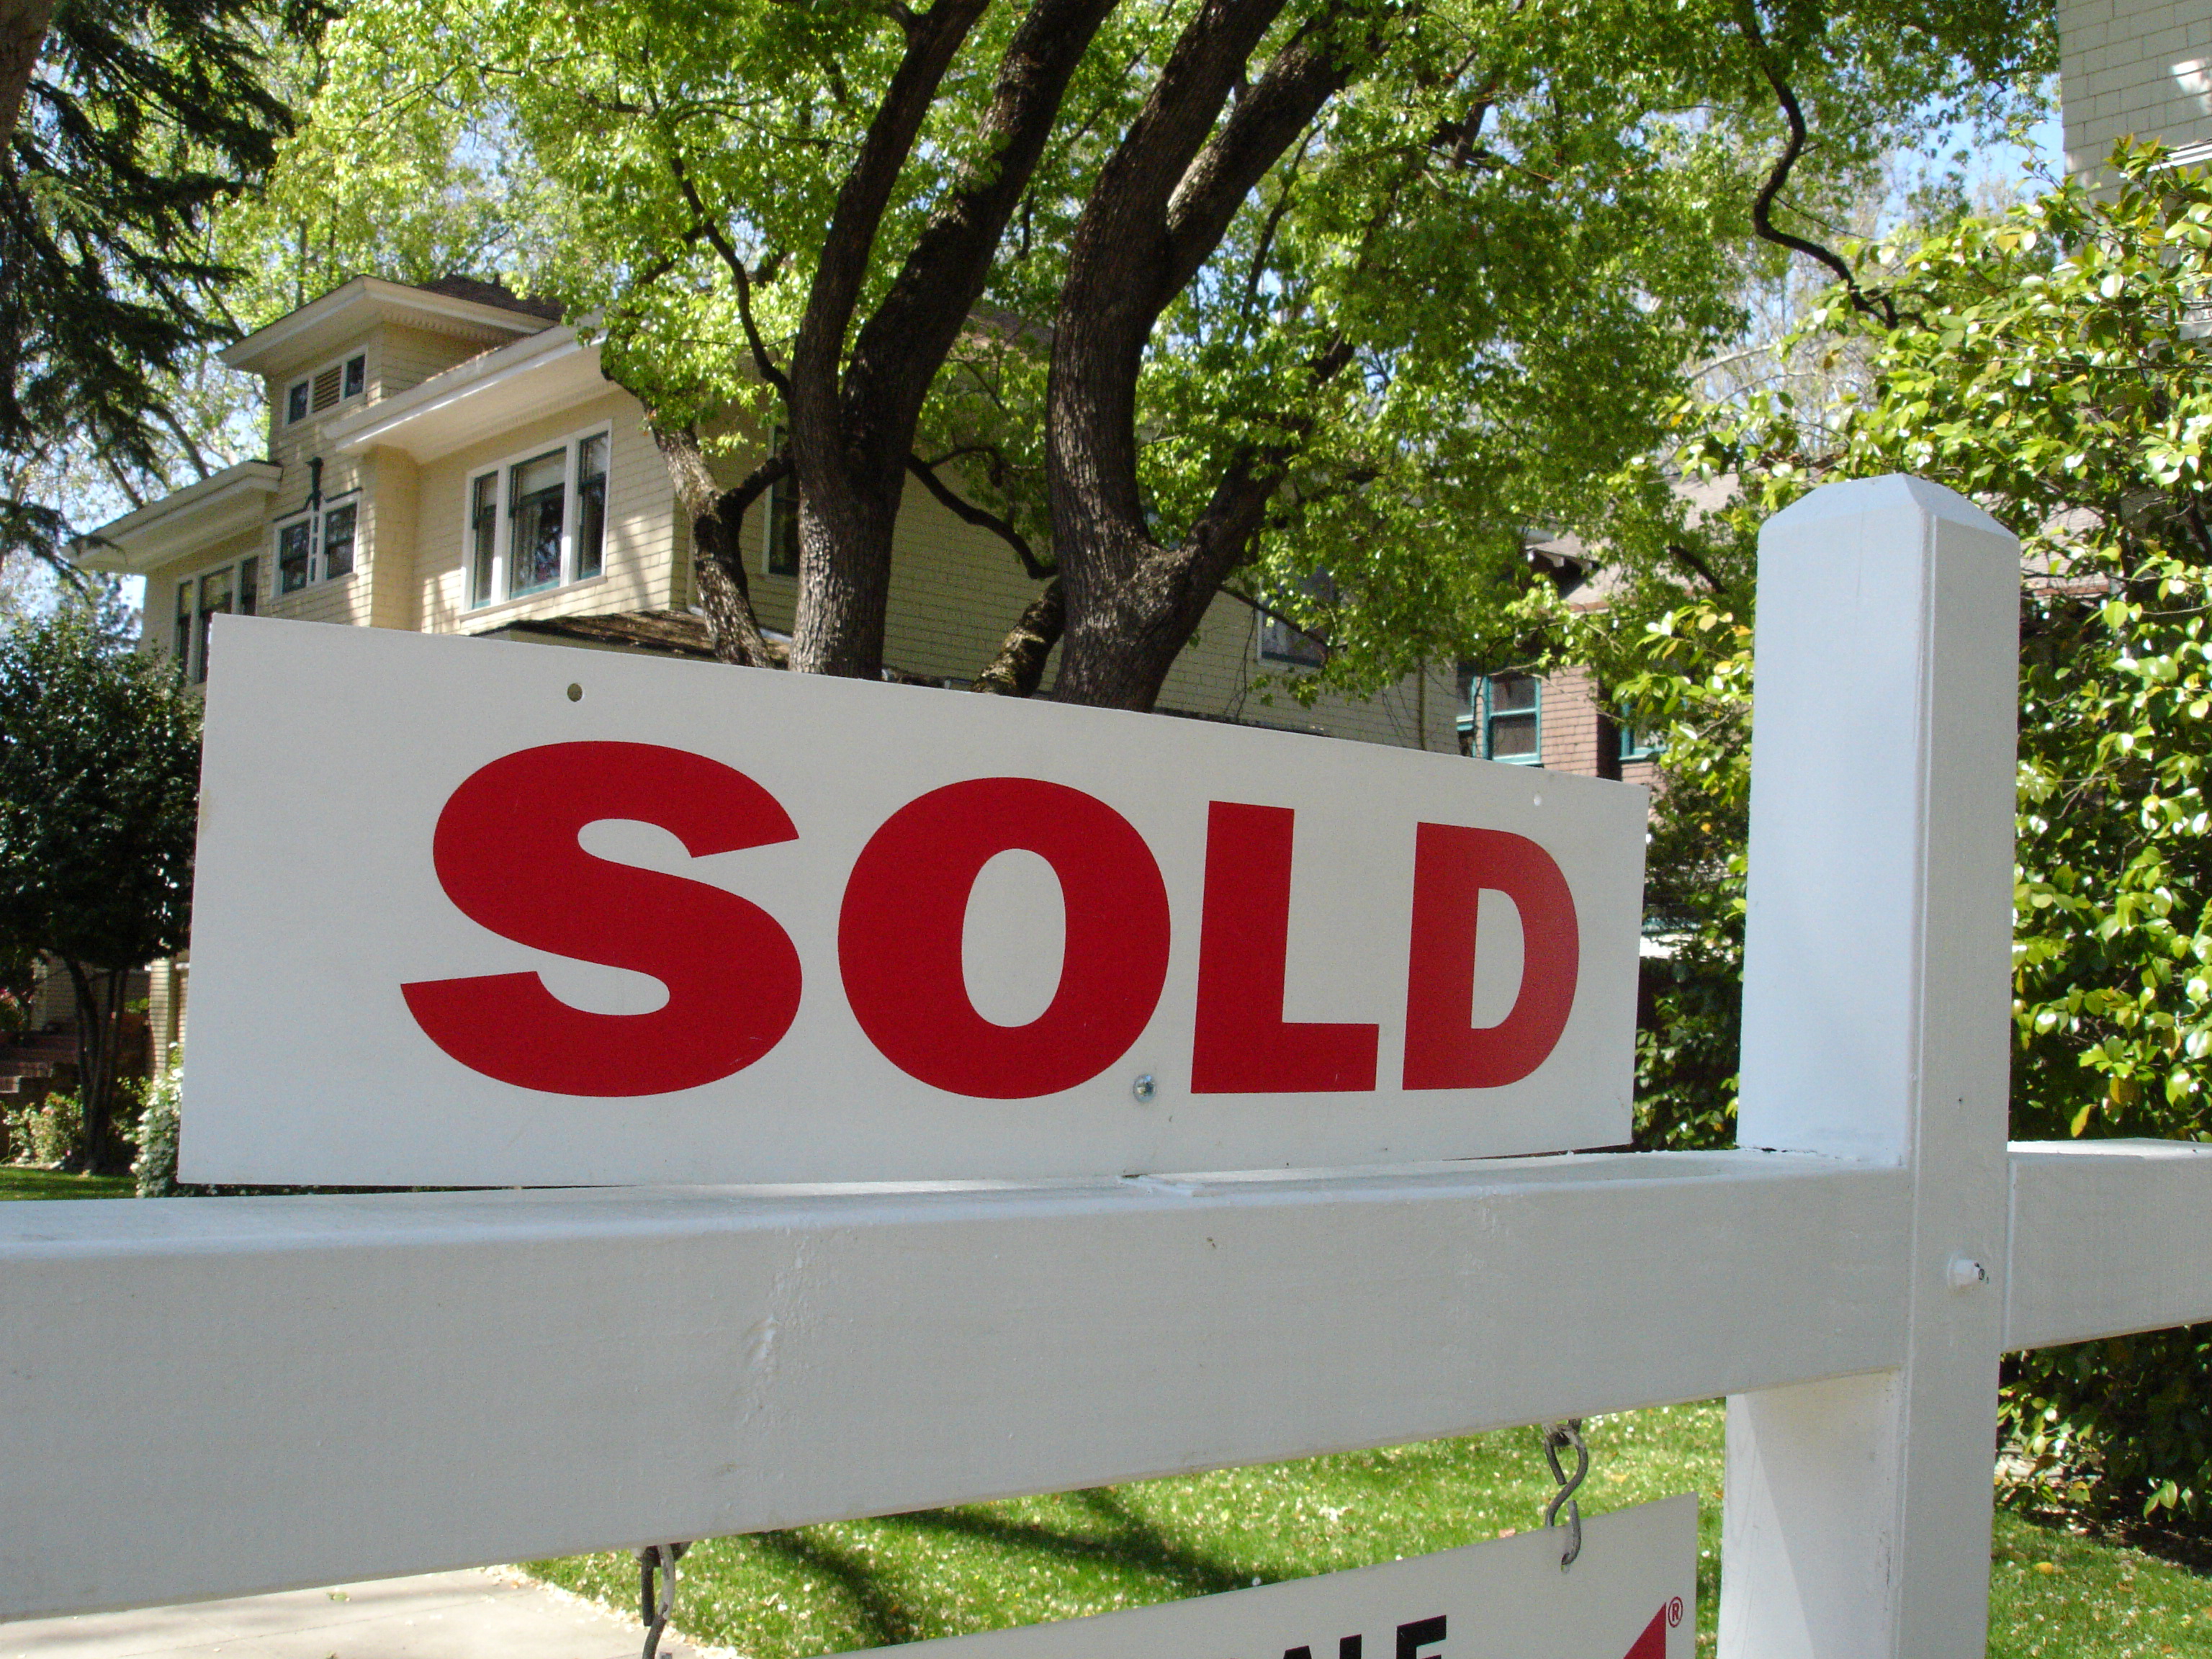 See all homes sold in Lorain County, June 5 to June 12